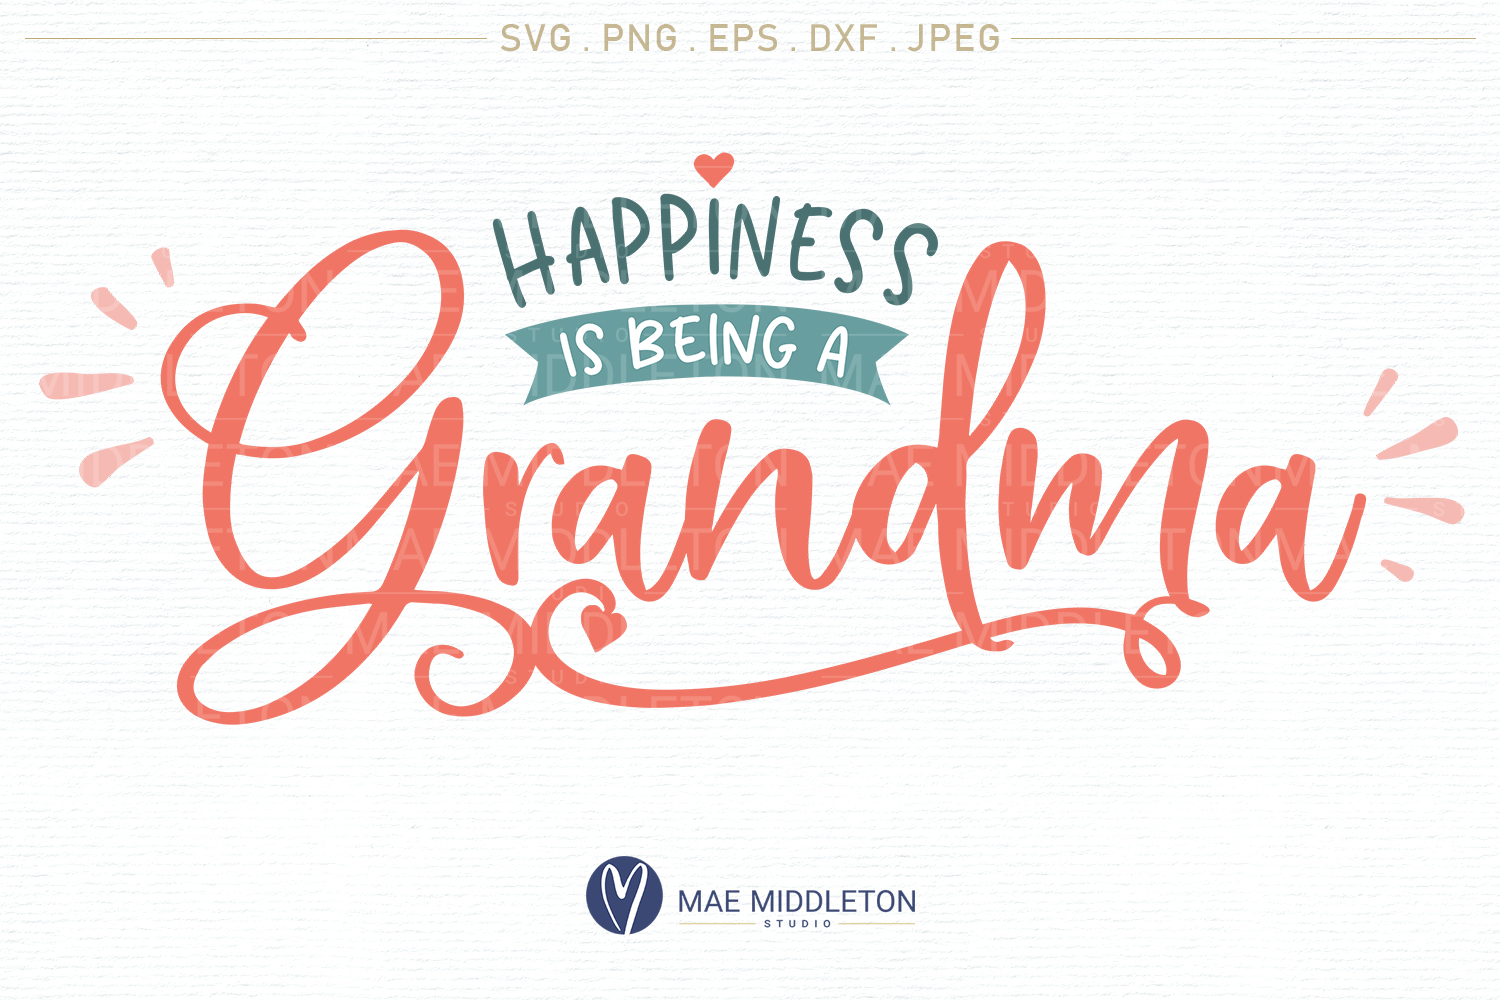 Happiness is being a Grandma, SVG design, PNG EPS DXF JPEG, grandma svg